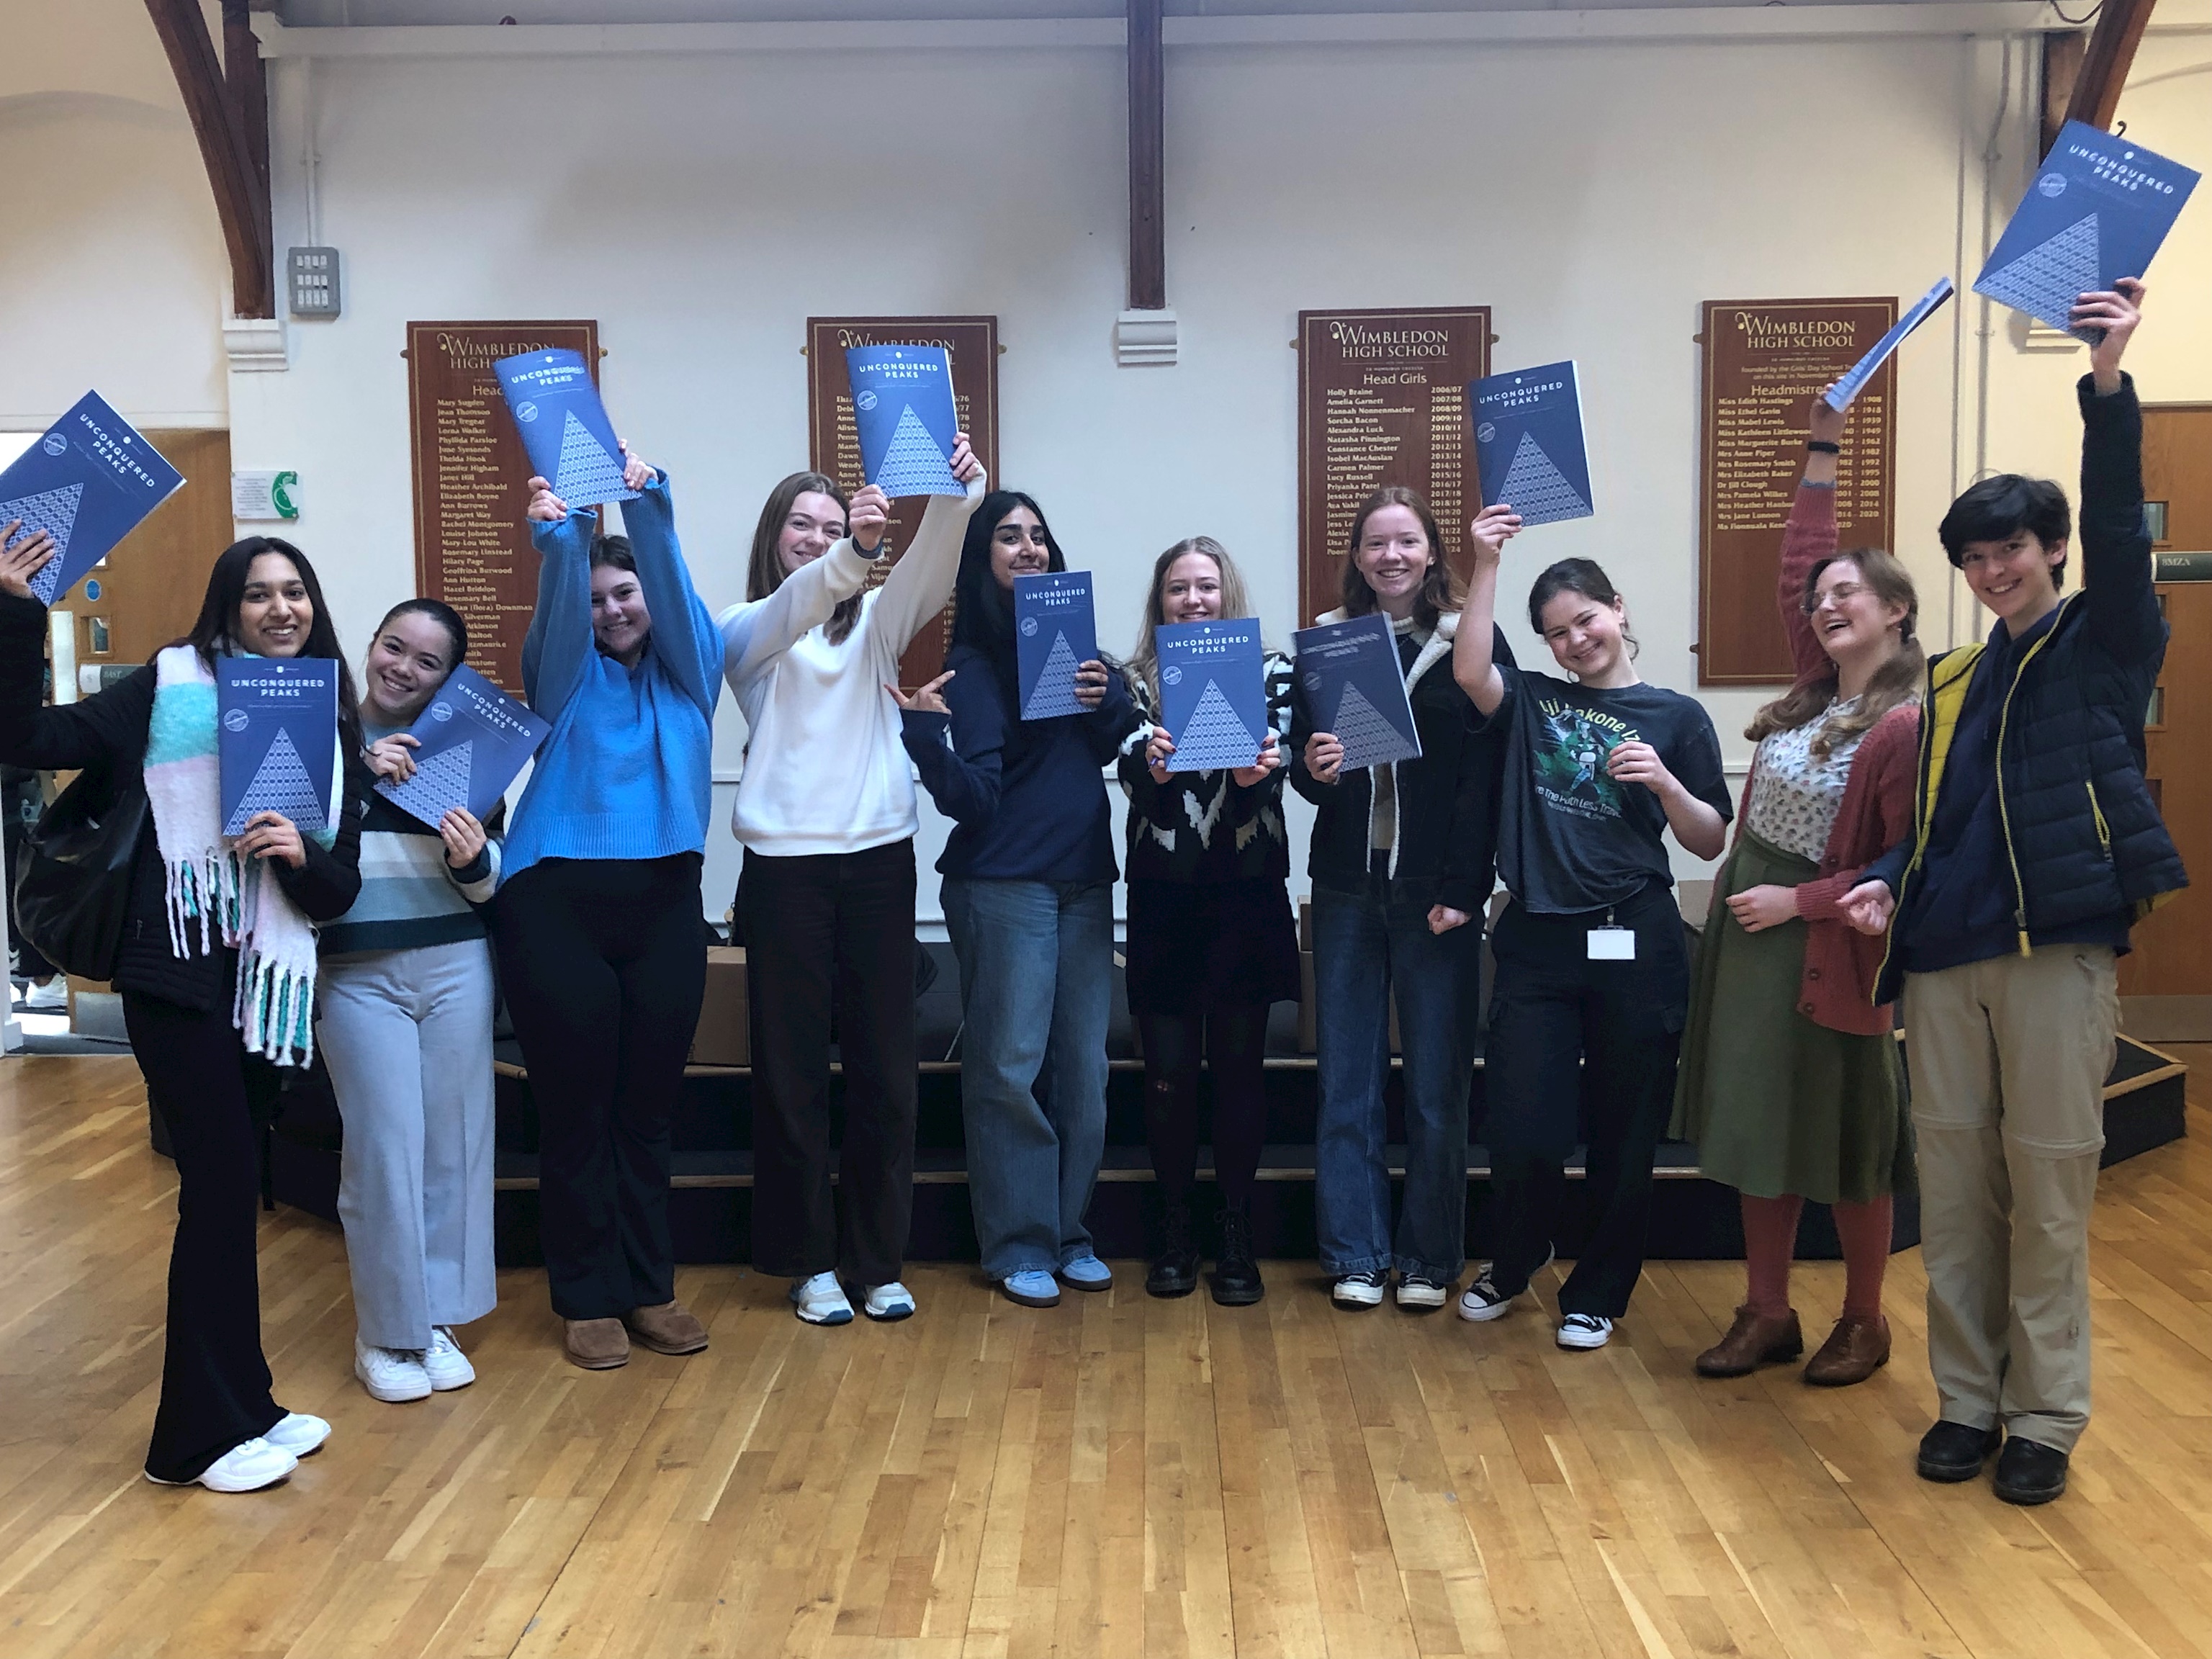 A photograph of all of the sixth form students who contributed to the latest edition of unconquered peaks. They are holding copies of the magazine in the air and looking happy